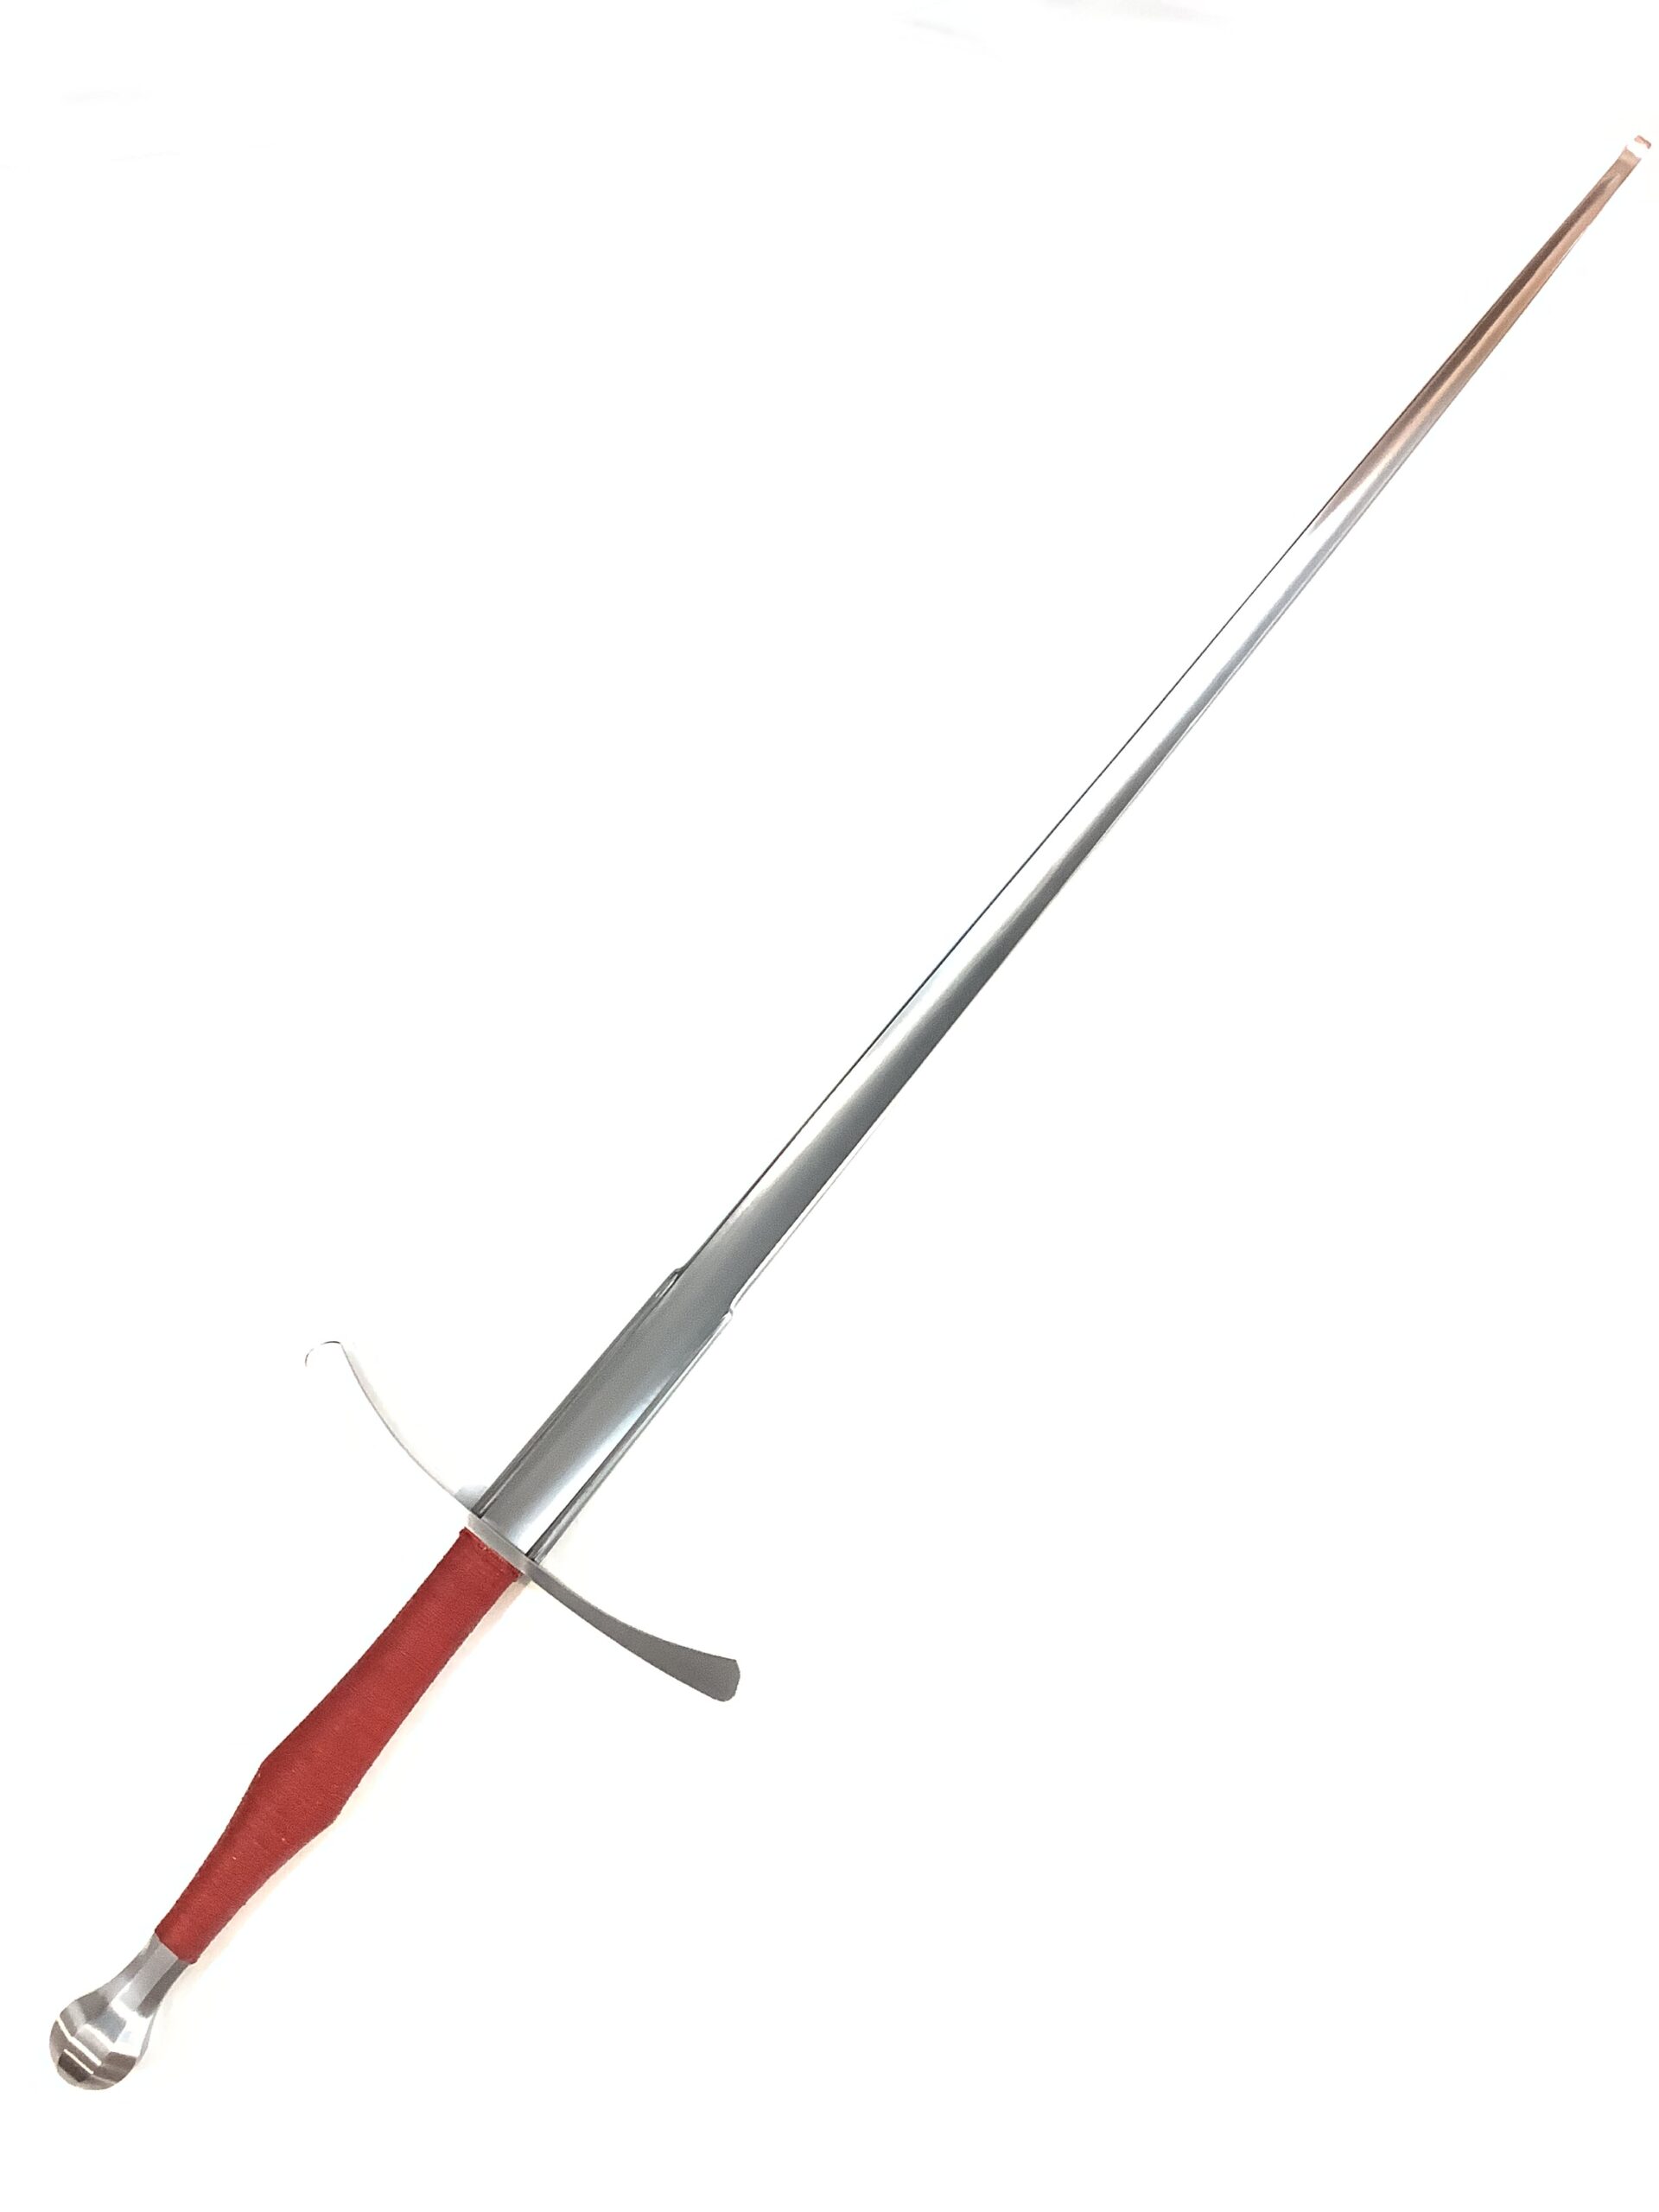 Chlebowski Fencing Sword III Red (1)